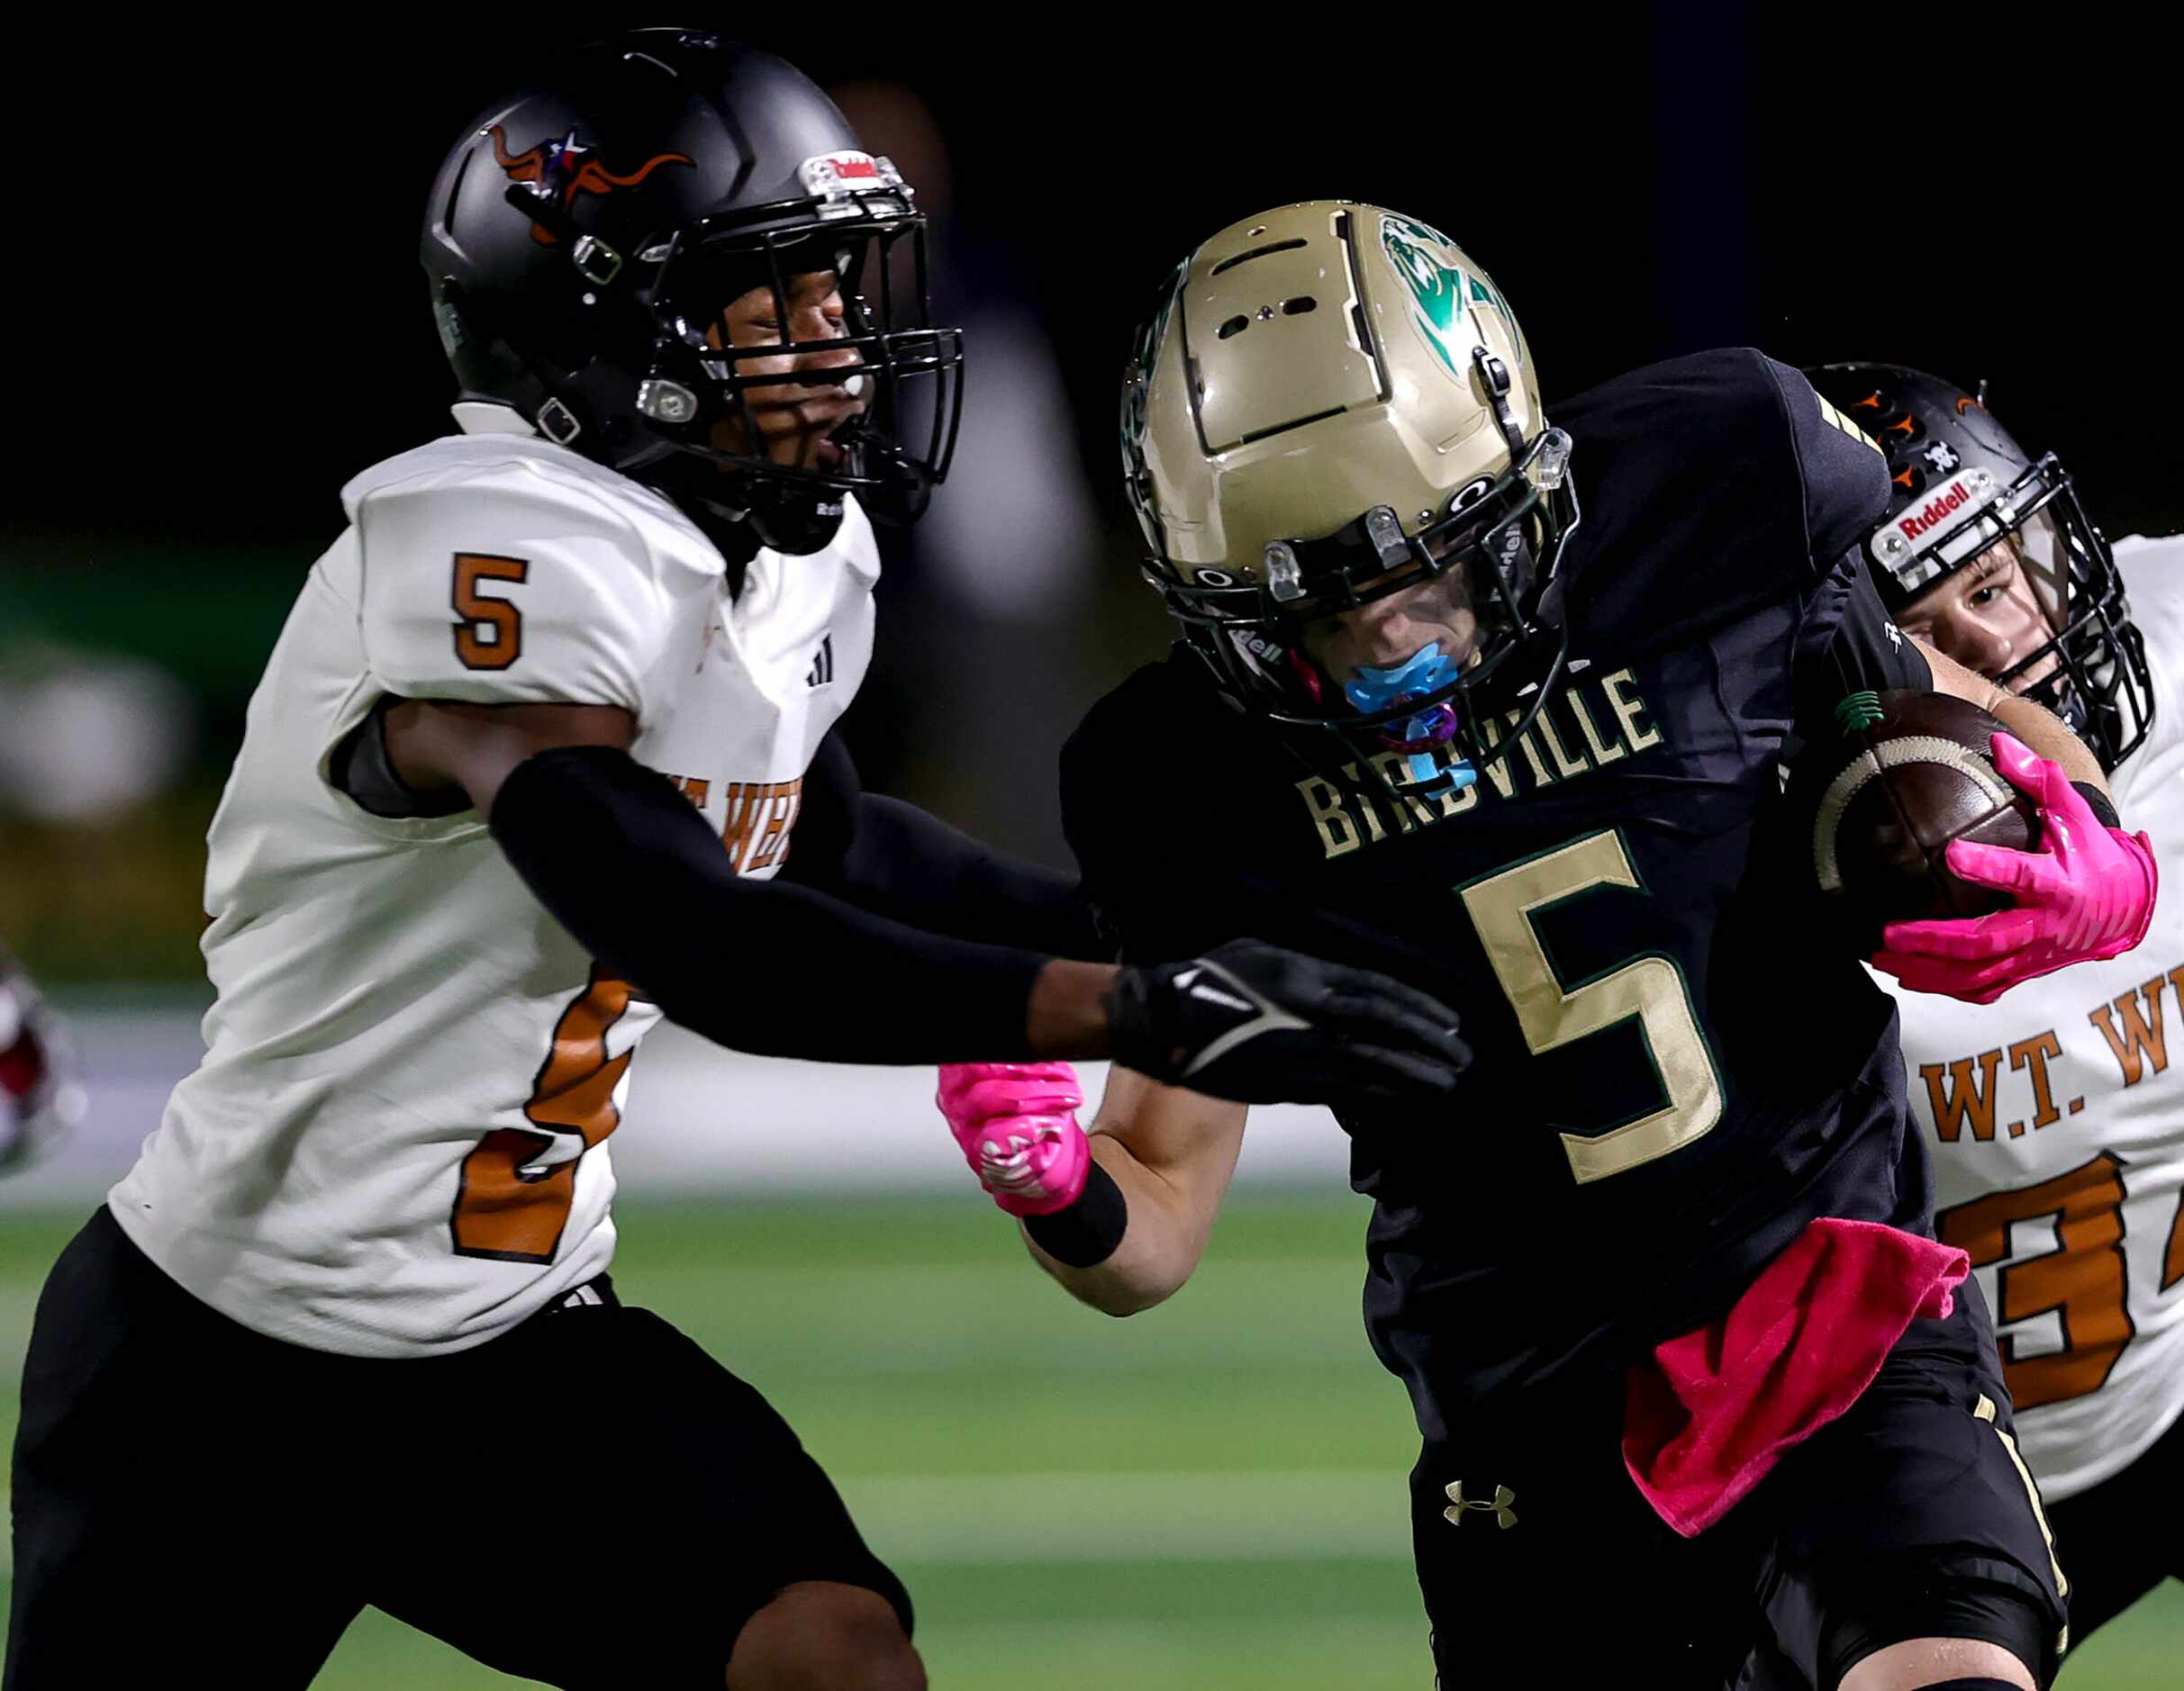 Birdville wide receiver Caleb Kelley (5) makes a reception and is pulled down by W.T. White...